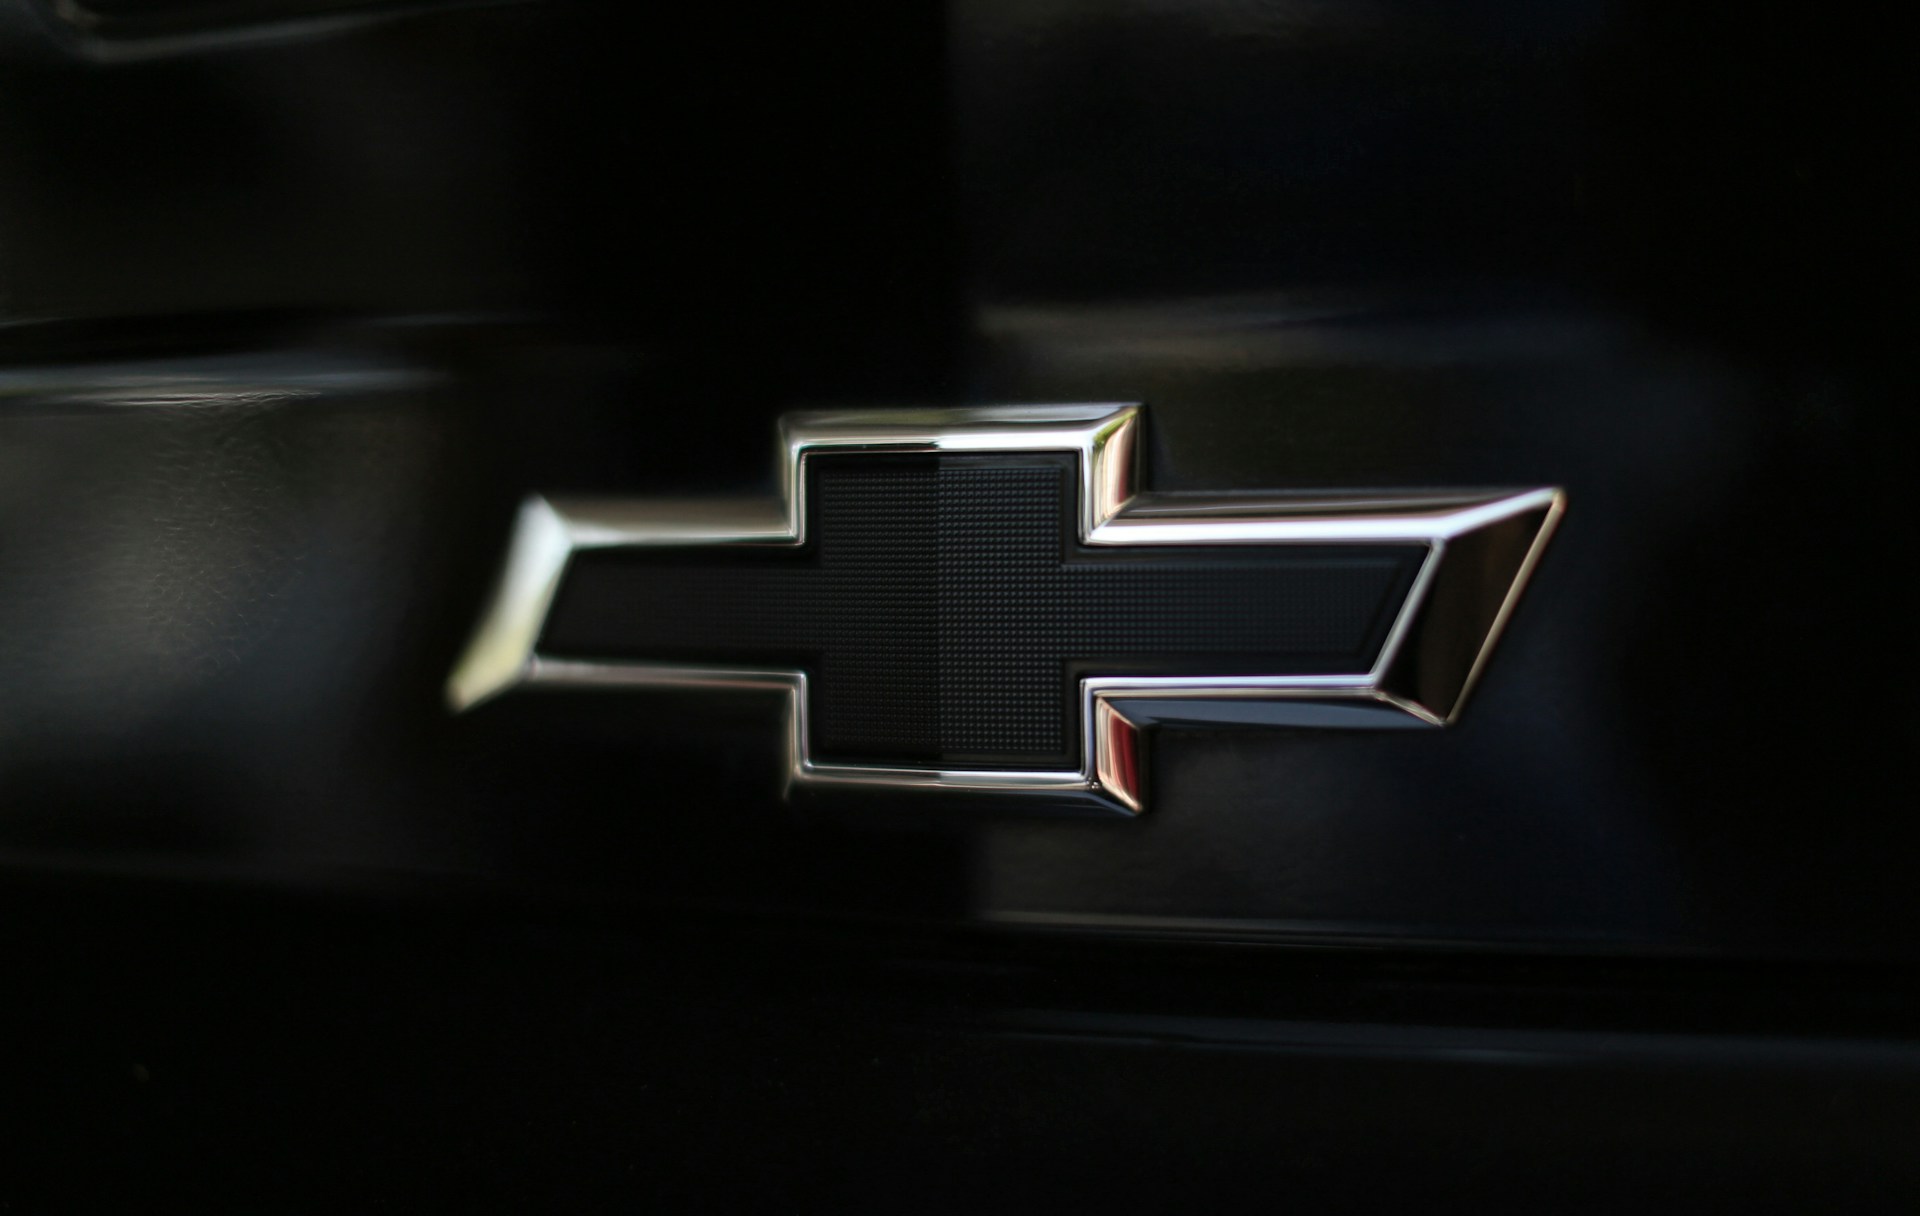 Close-up photo of the Chevrolet logo on a car.